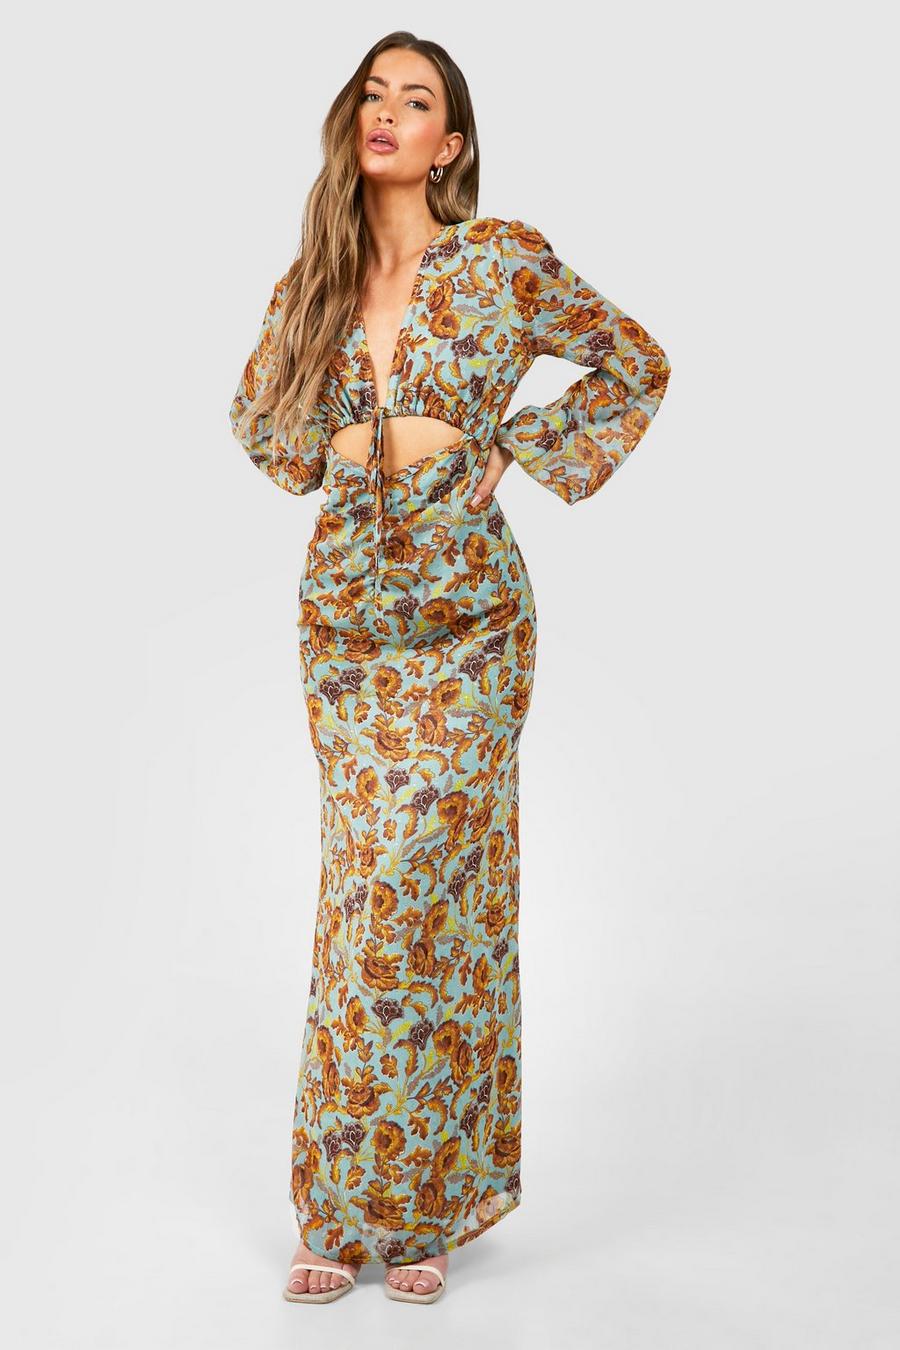 Blue Floral Ruched Cut Out Maxi Dress